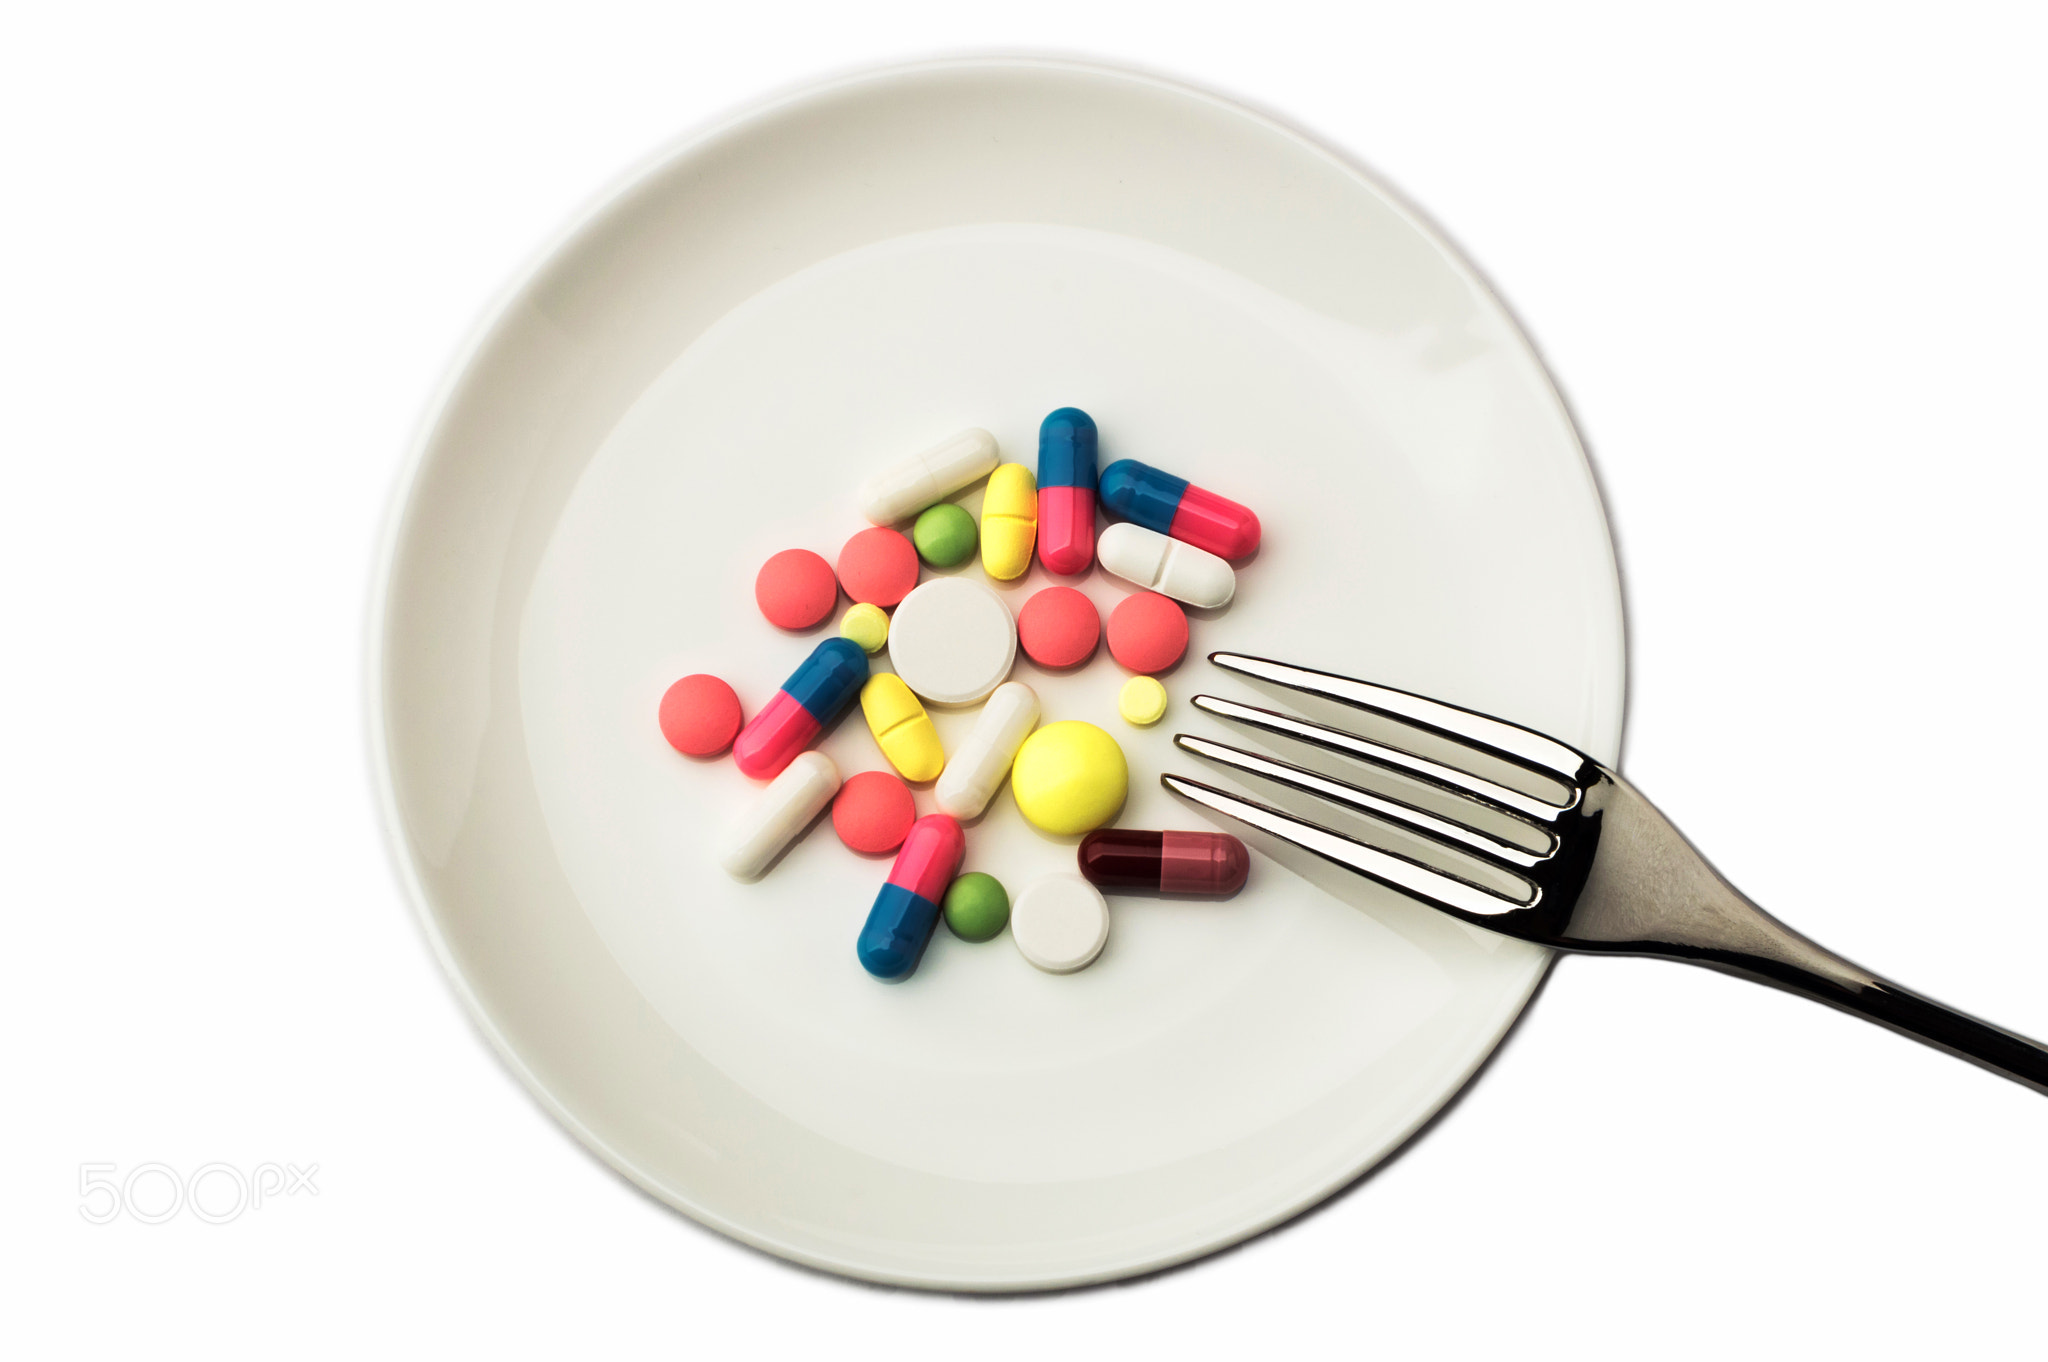 Pills on white plate with fork. Pill instead of food